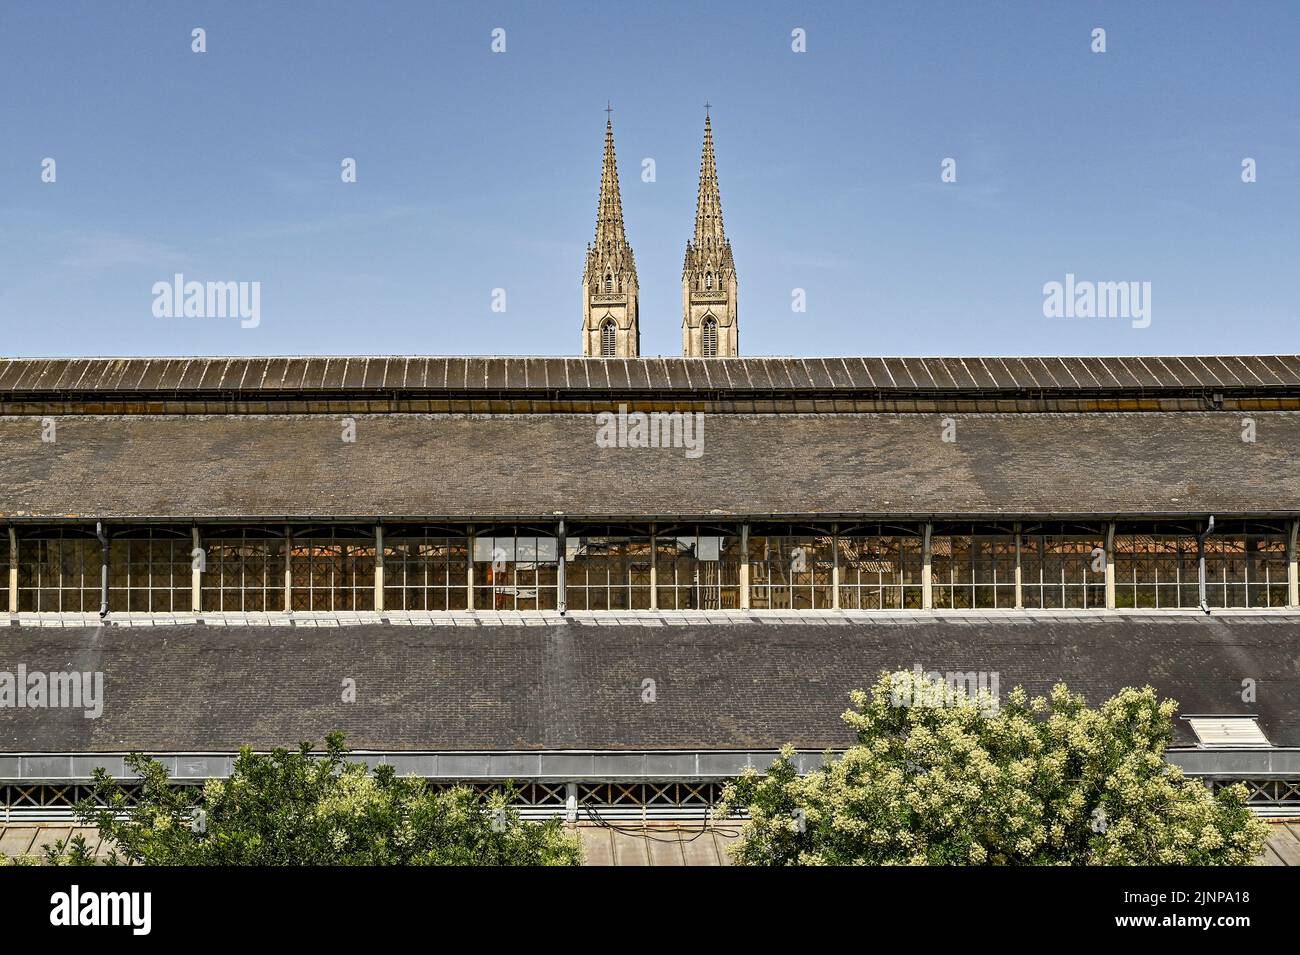 The twin towers of the église Sainte-André towering over the roof of the famous market hall of Niort, France Stock Photo